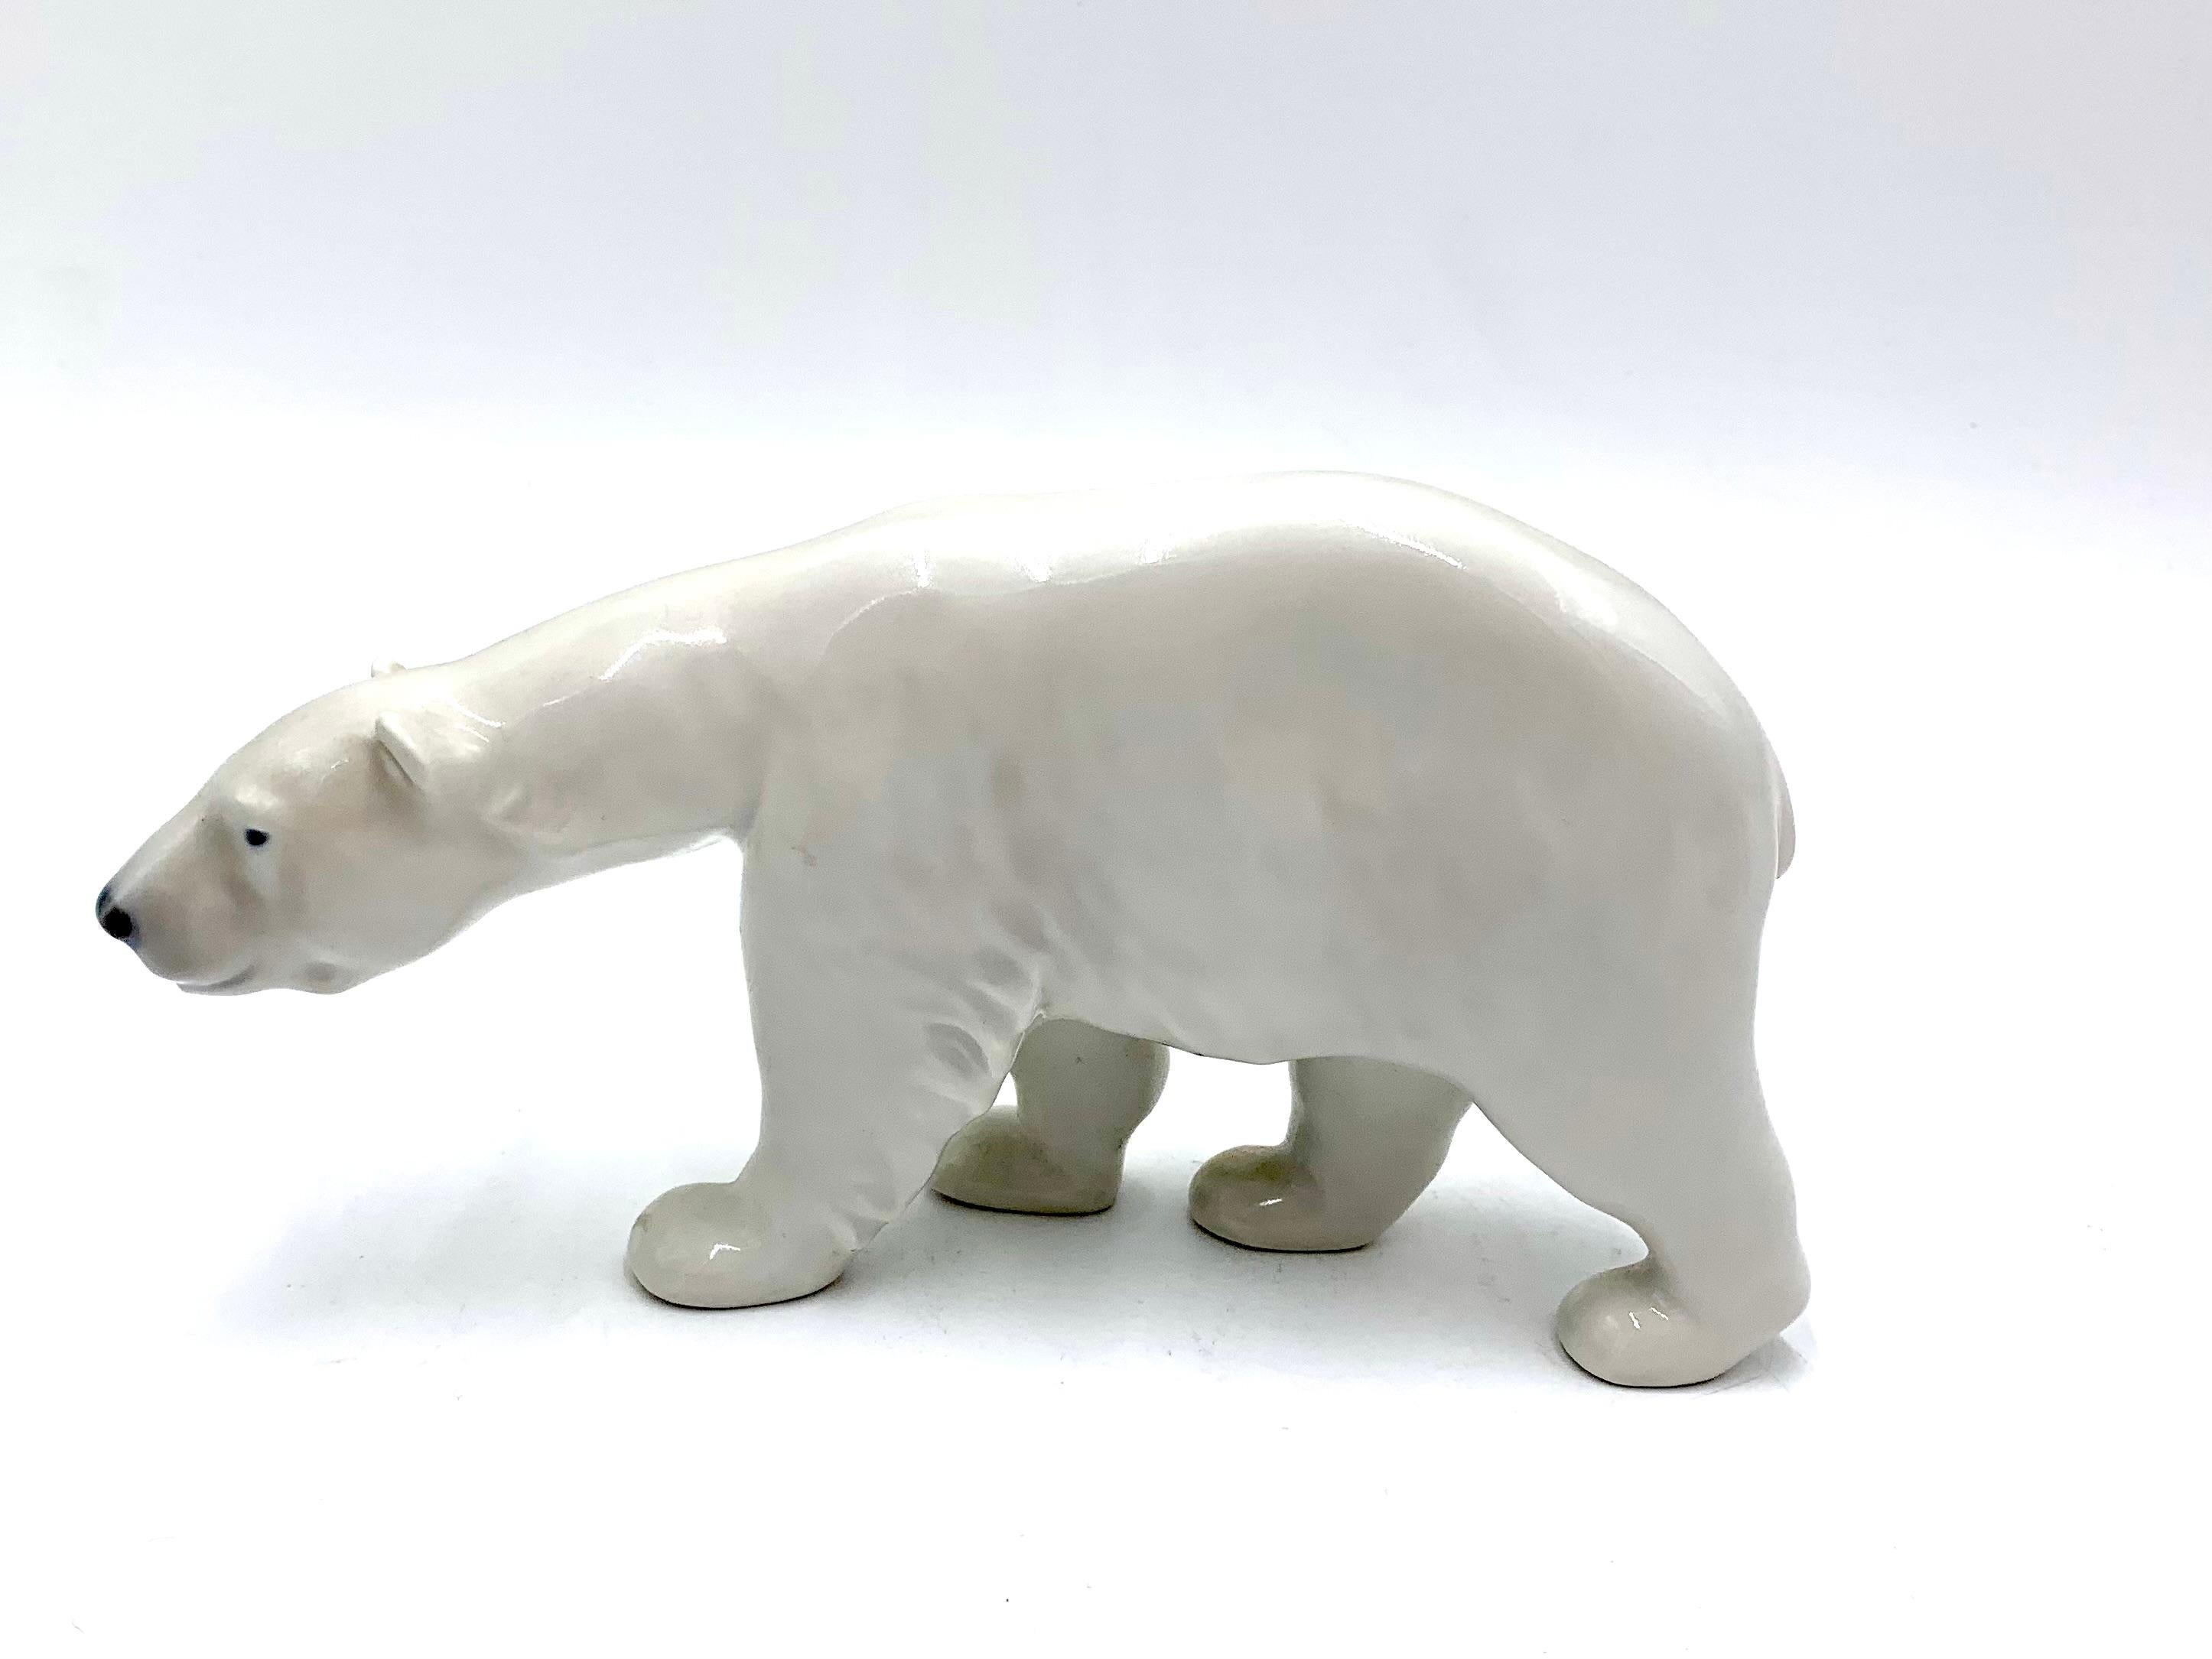 Porcelain figurine of a walking polar bear

Made in Denmark by the Royal Copenhagen manufactory

Manufactured in the 1920s.

Model number 0320

Very good condition, no damage.

Measures: height 10cm, width 18.5cm, depth 4.5cm.